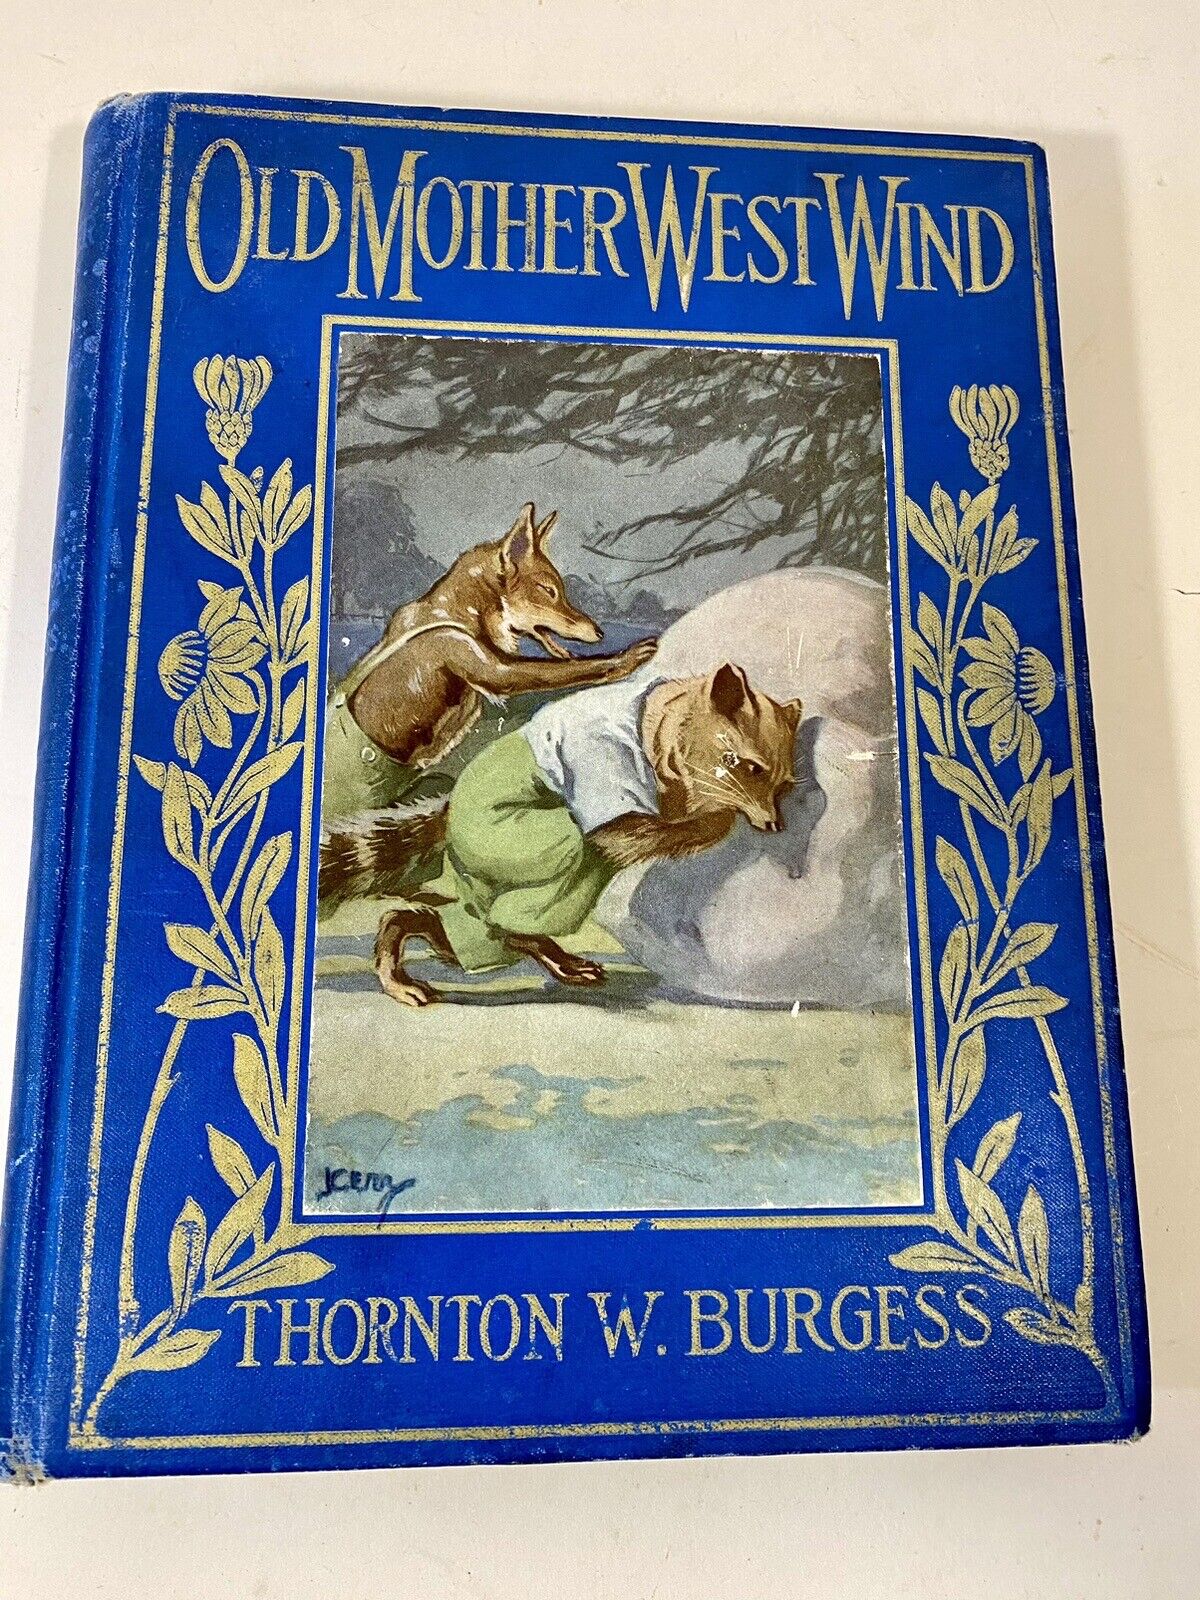 1918 Old Mother West Wind by Thornton Burgess Hardcover Illustrated George Kerr